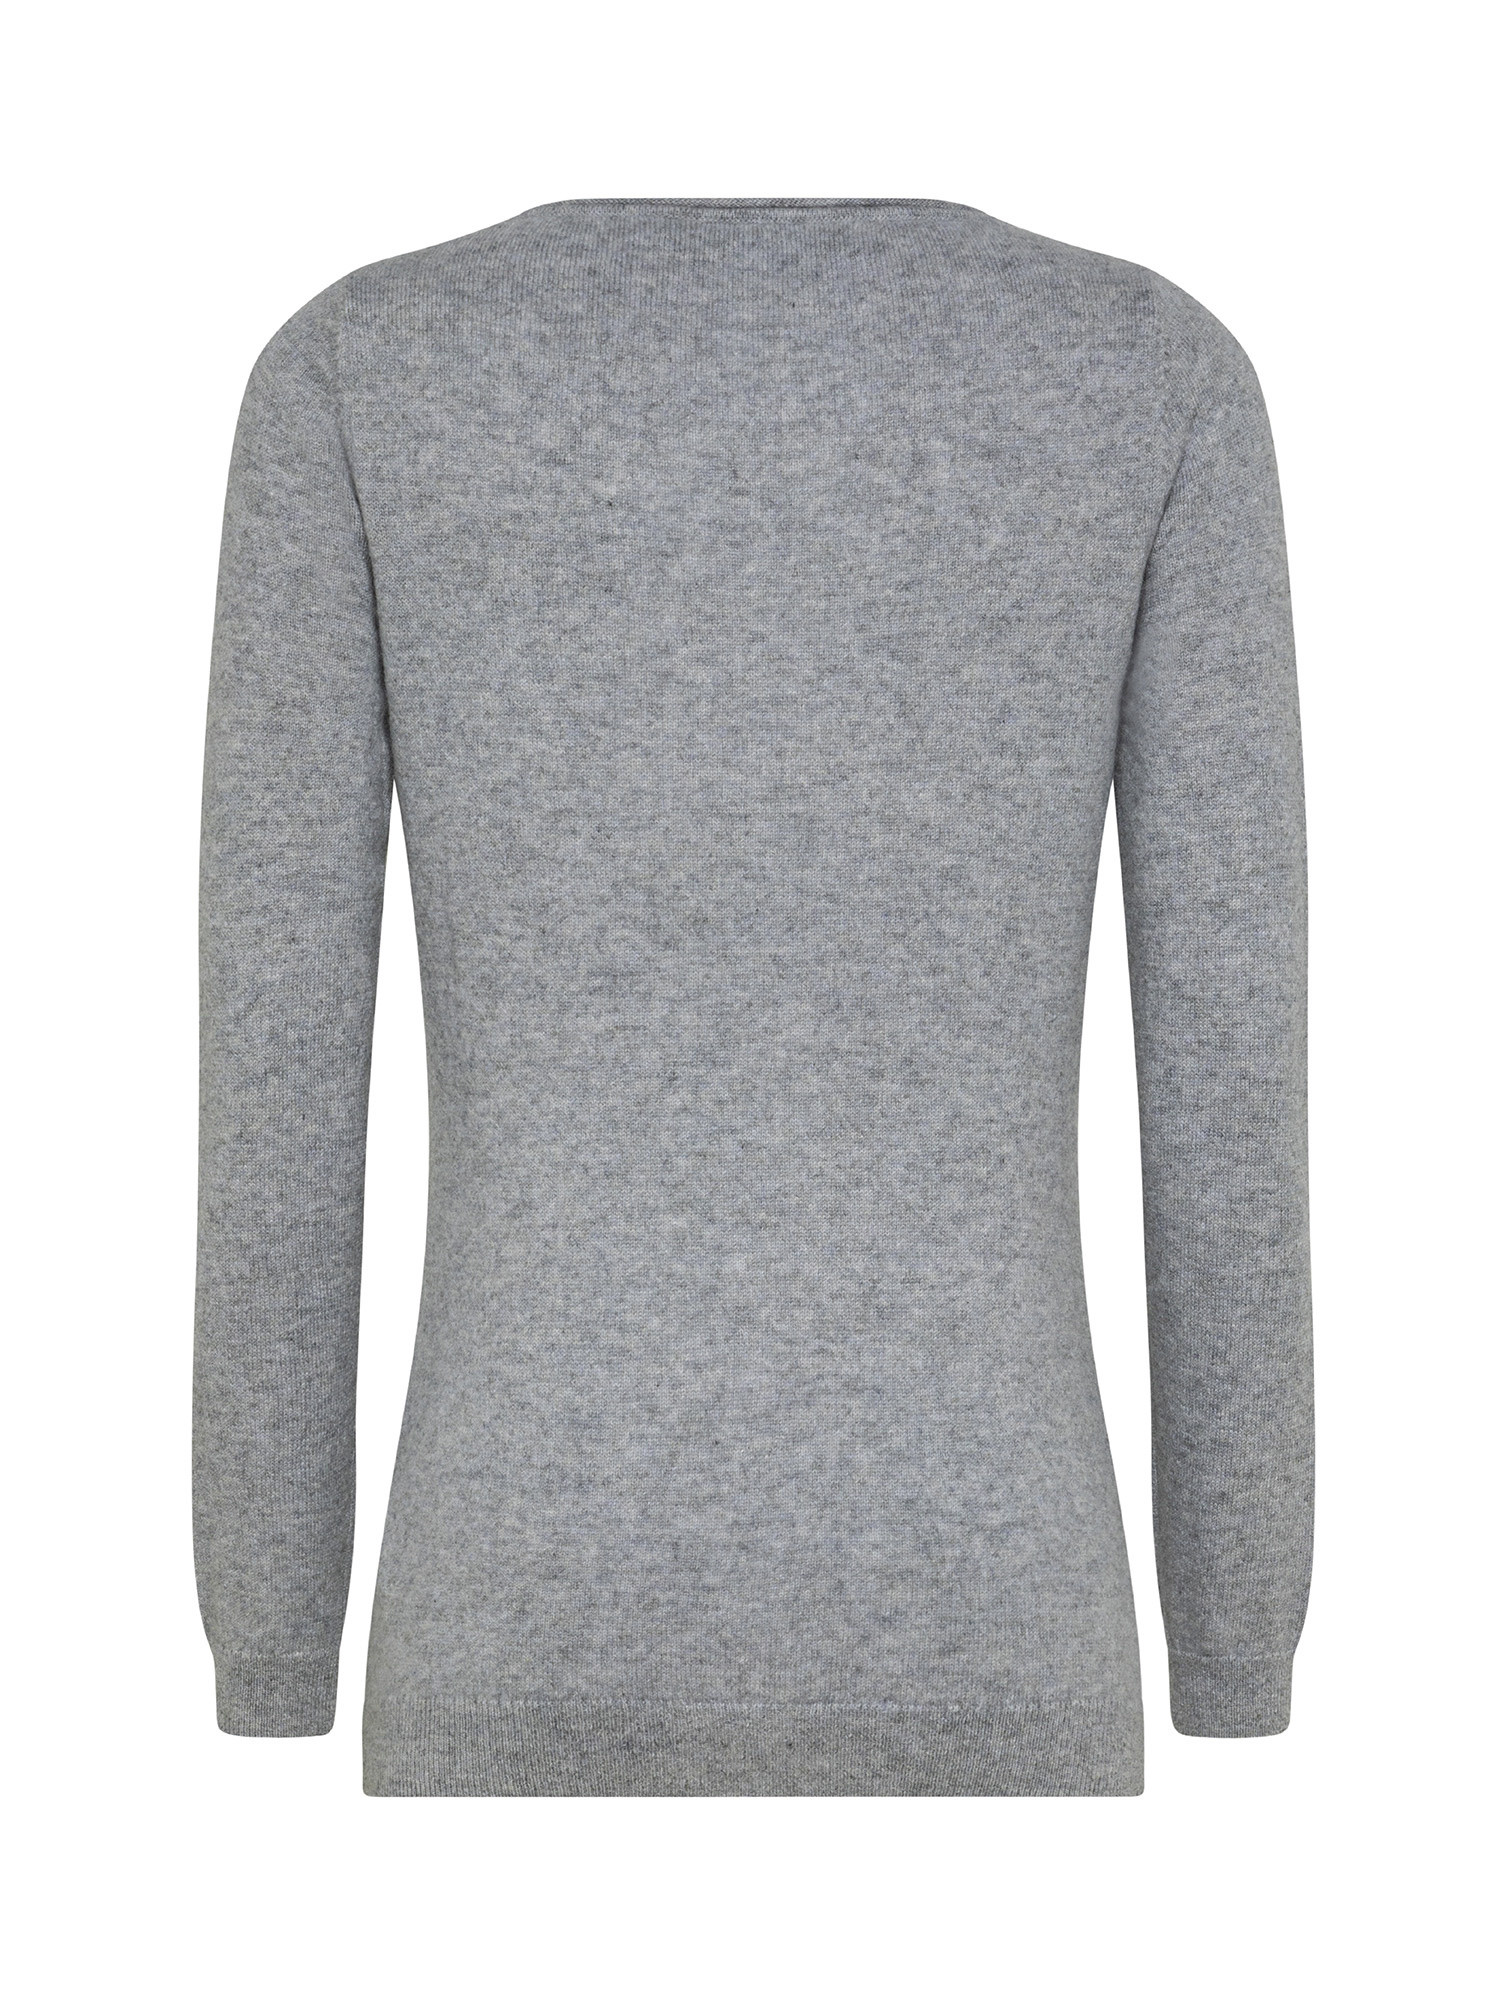 Koan - Pure cashmere boat neck pullover, Grey, large image number 1